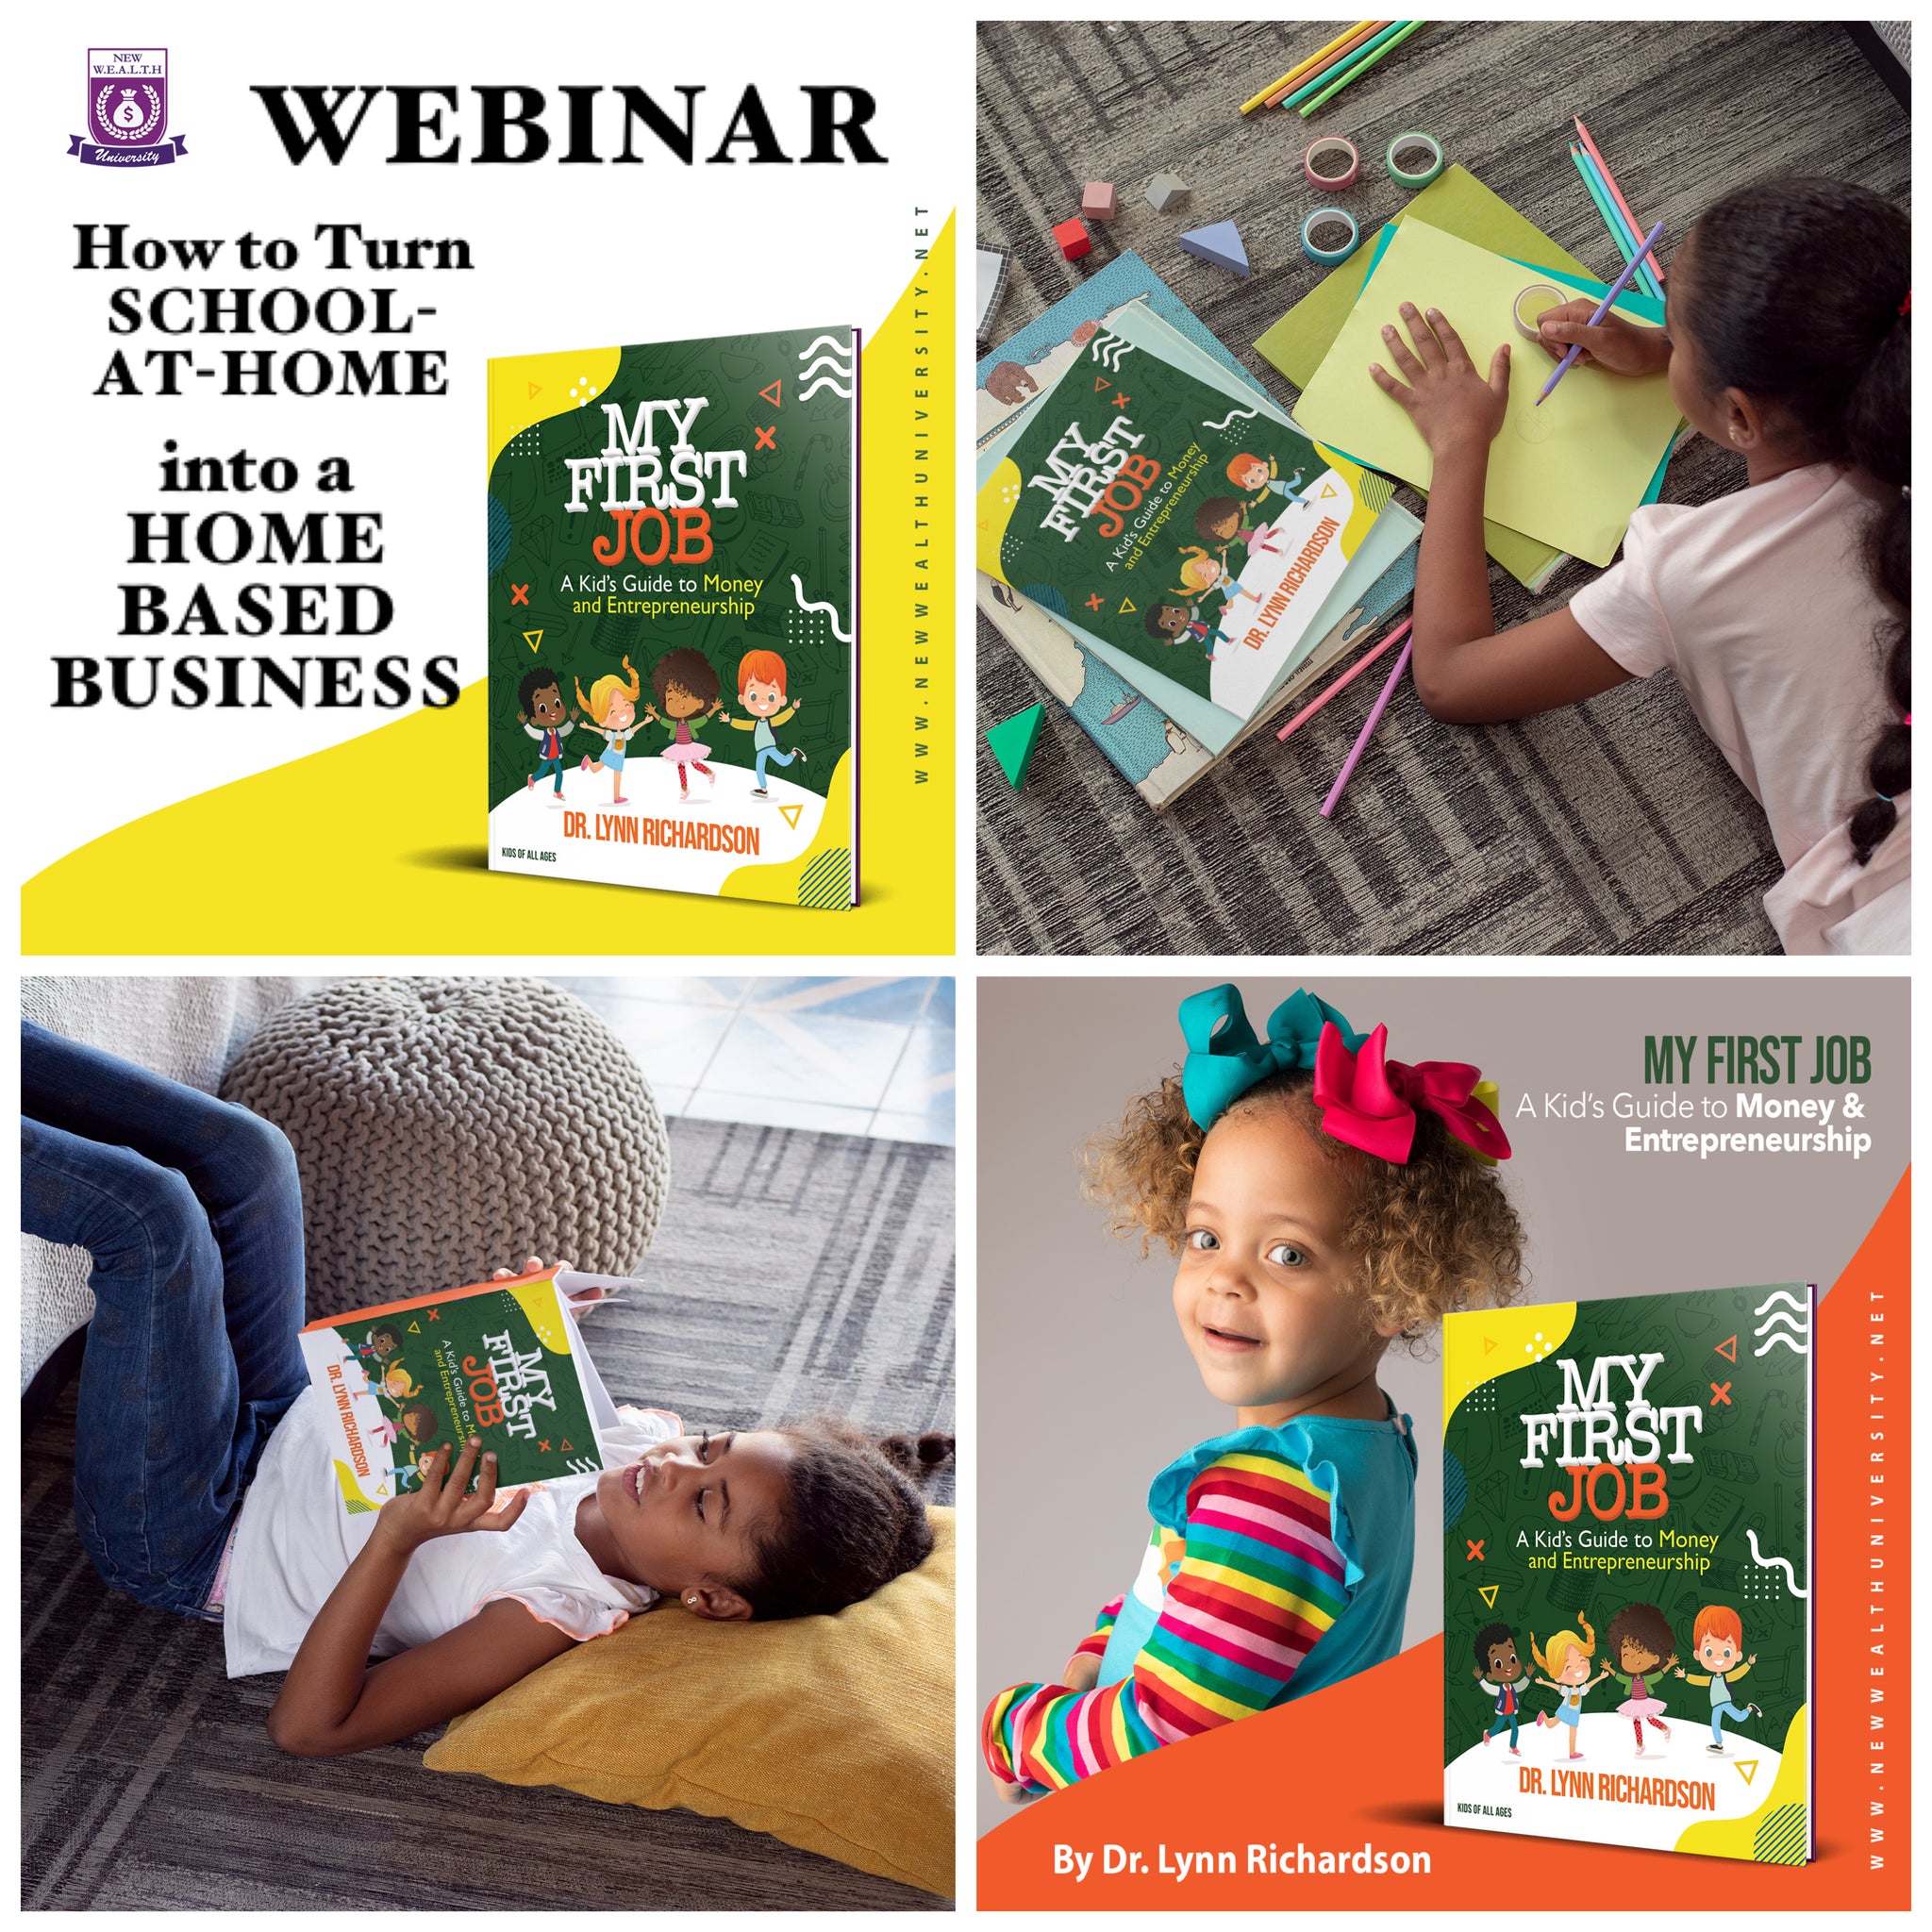 HIRE YOUR KIDS AND GET YOUR MONEY BACK! How to Turn "School-at-Home" into a "Homebased Business" Webinar